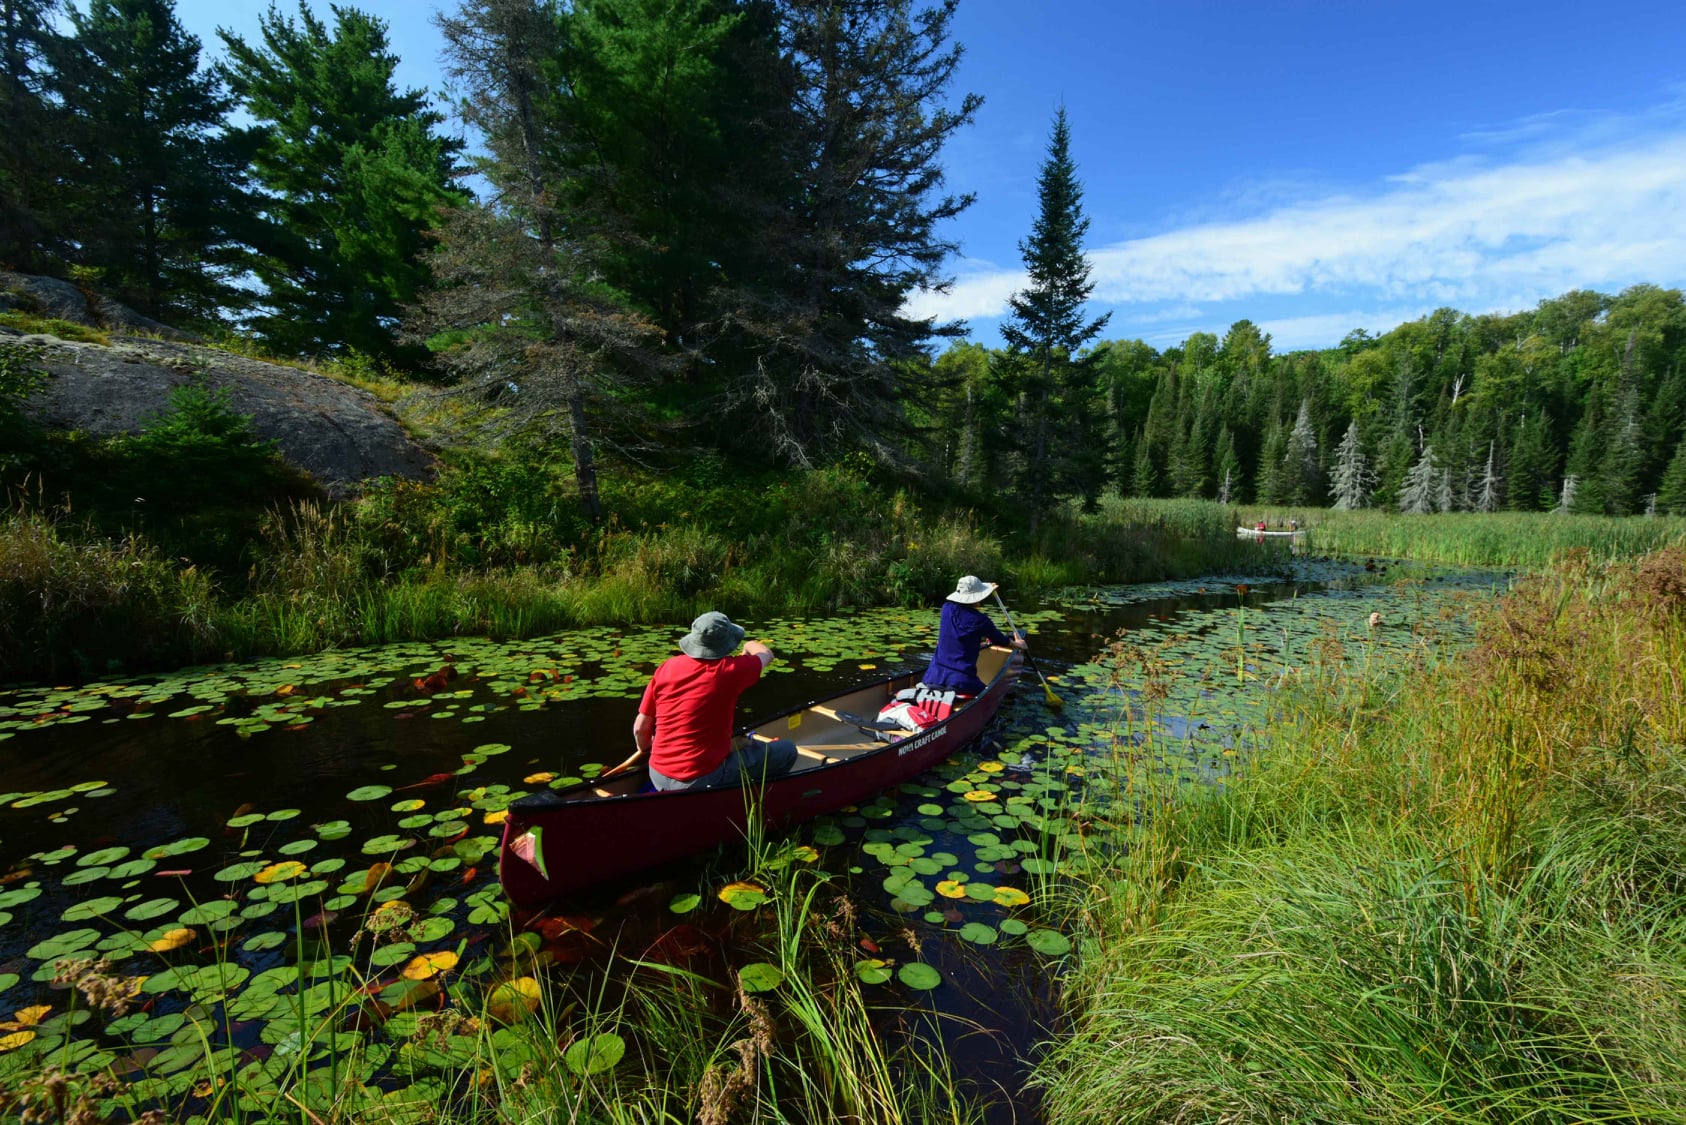 Two people in a canoe paddle along a creek filled with lilypads, surrounded by lush green forest under a blue sky.